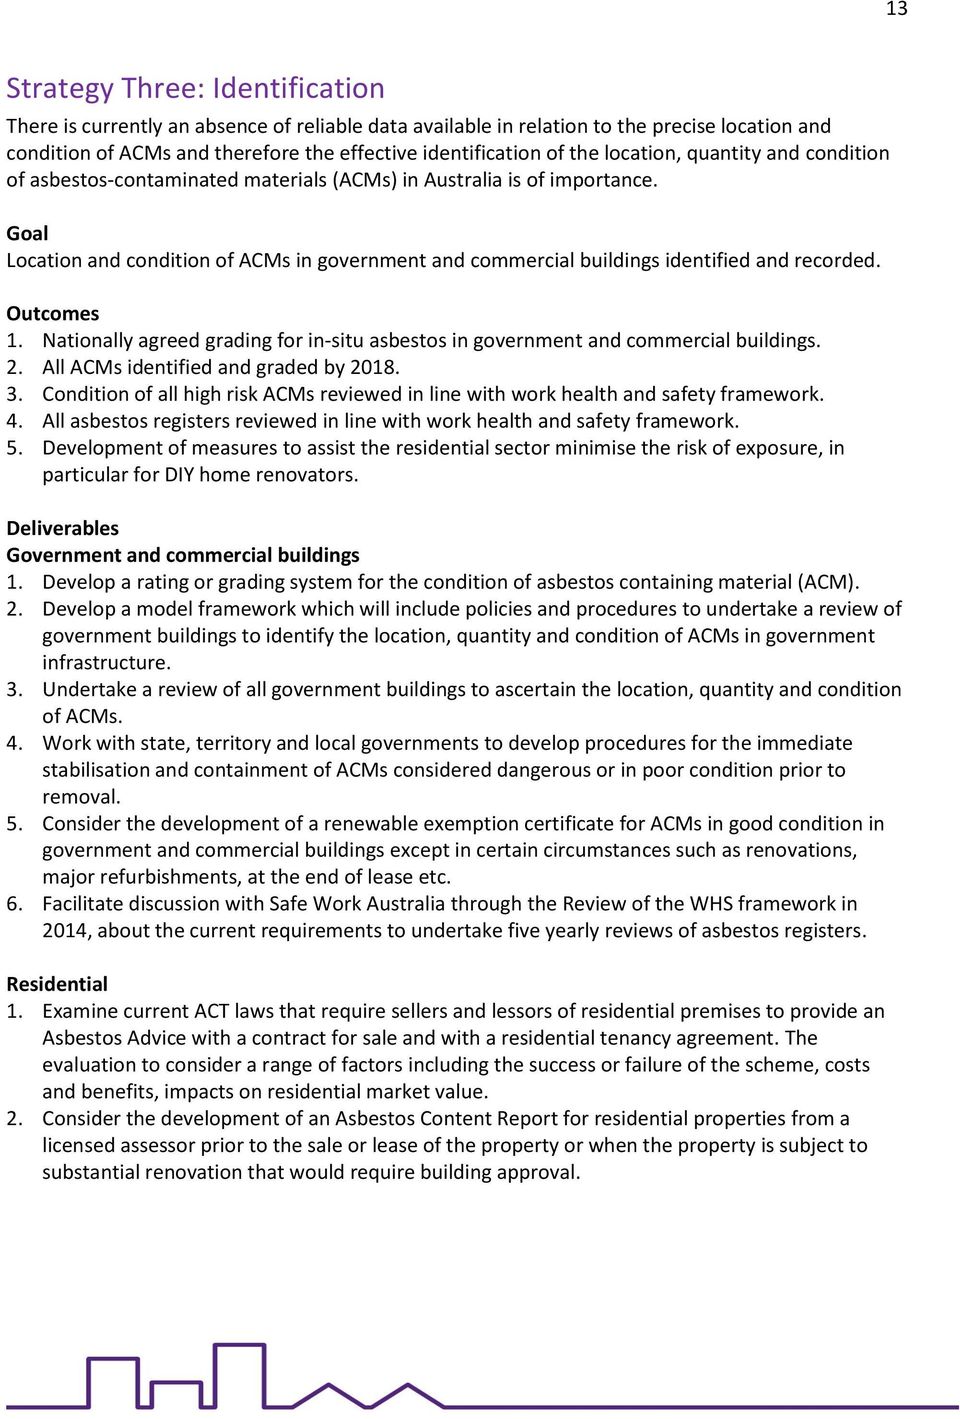 Goal Location and condition of ACMs in government and commercial buildings identified and recorded. Outcomes 1. Nationally agreed grading for in-situ asbestos in government and commercial buildings.